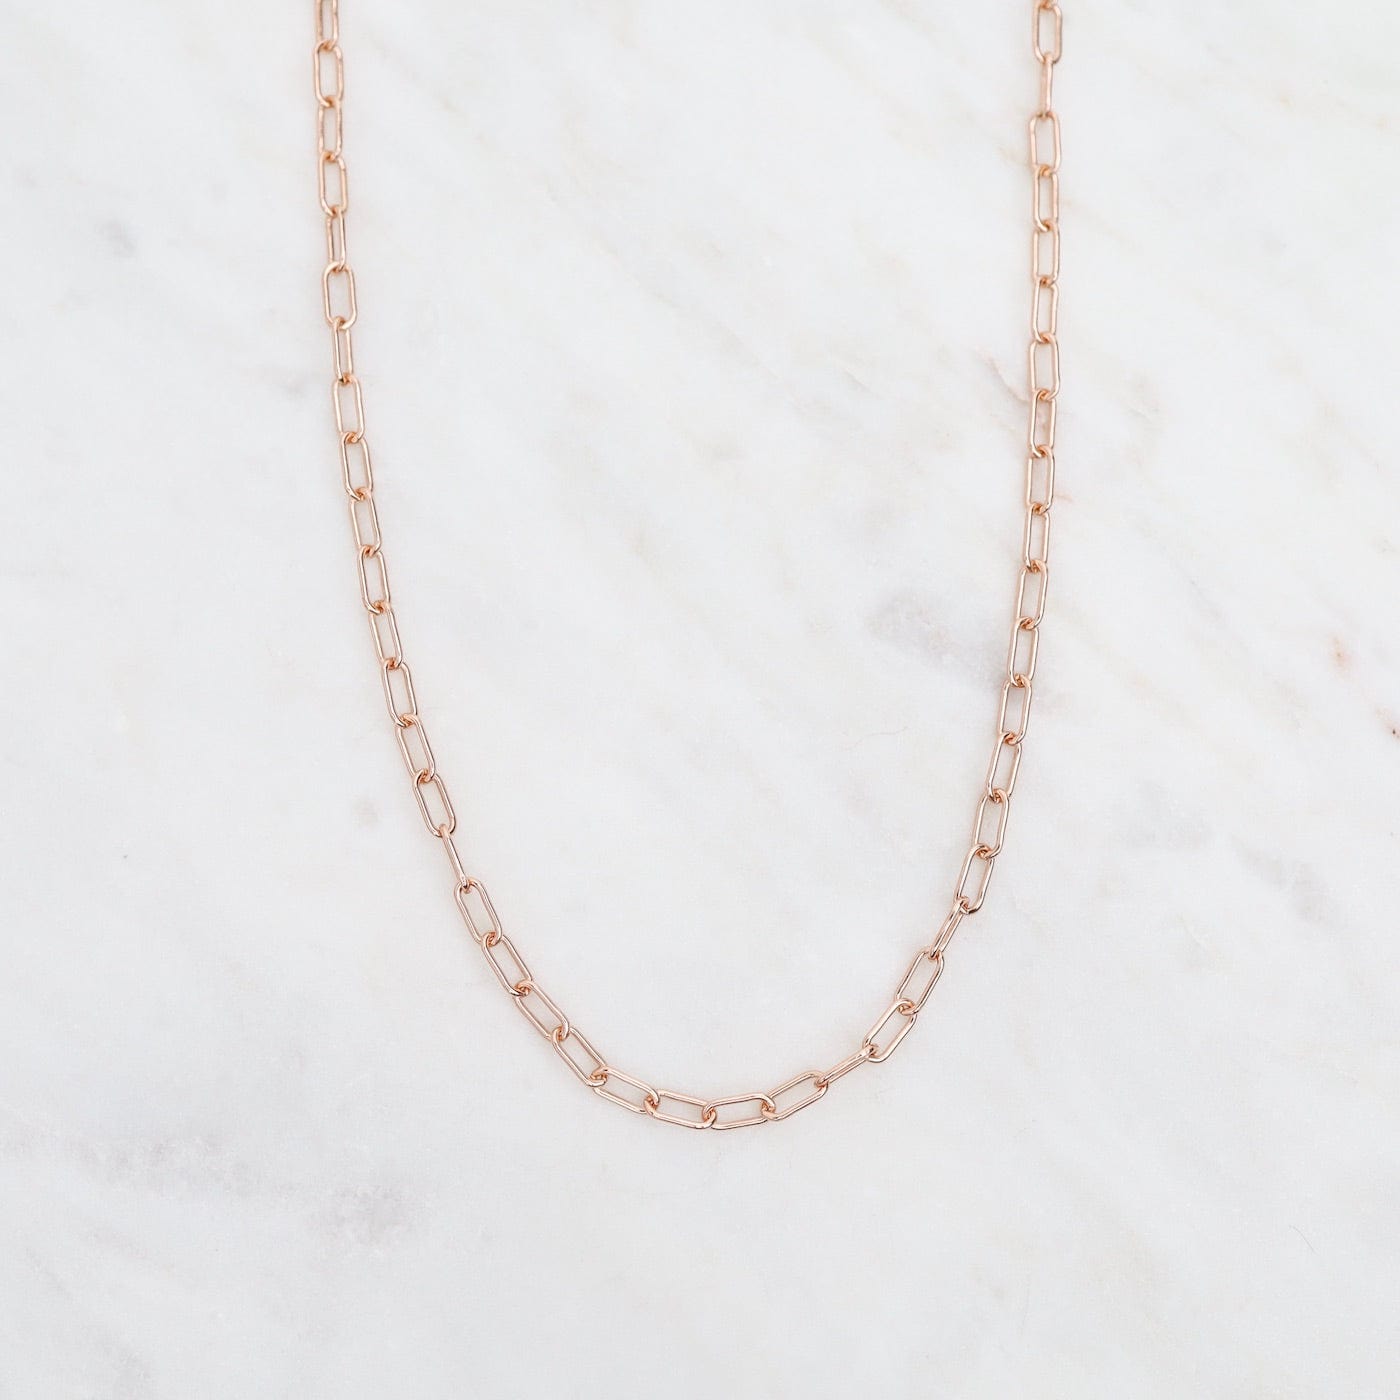 NKL-GF 16" Rose Gold Filled Round Drawn Cable Chain Necklace